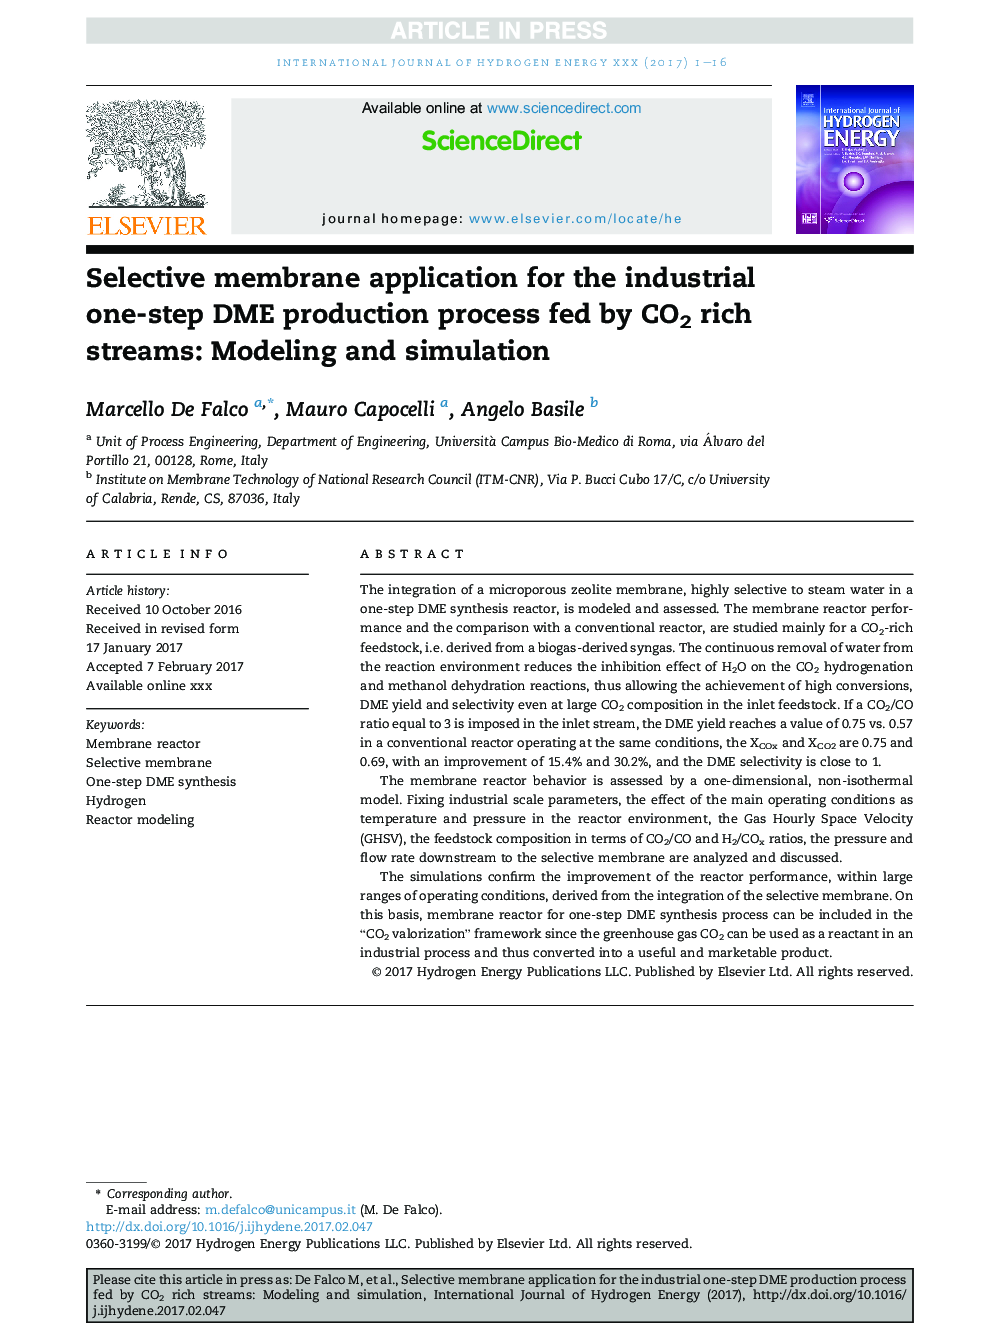 Selective membrane application for the industrial one-step DME production process fed by CO2 rich streams: Modeling and simulation